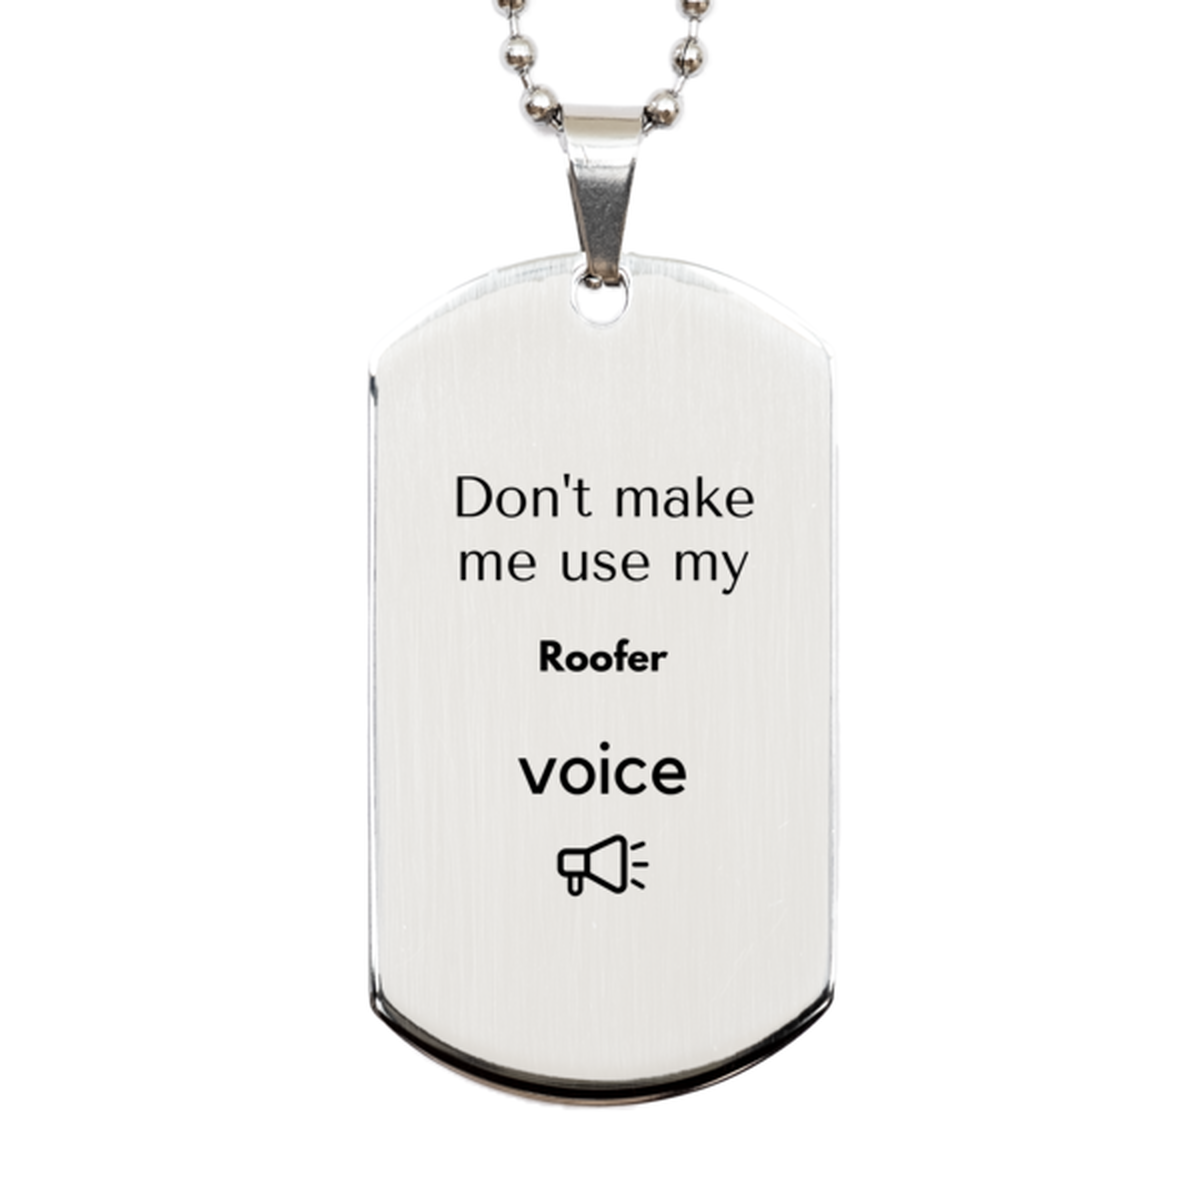 Don't make me use my Roofer voice, Sarcasm Roofer Gifts, Christmas Roofer Silver Dog Tag Birthday Unique Gifts For Roofer Coworkers, Men, Women, Colleague, Friends